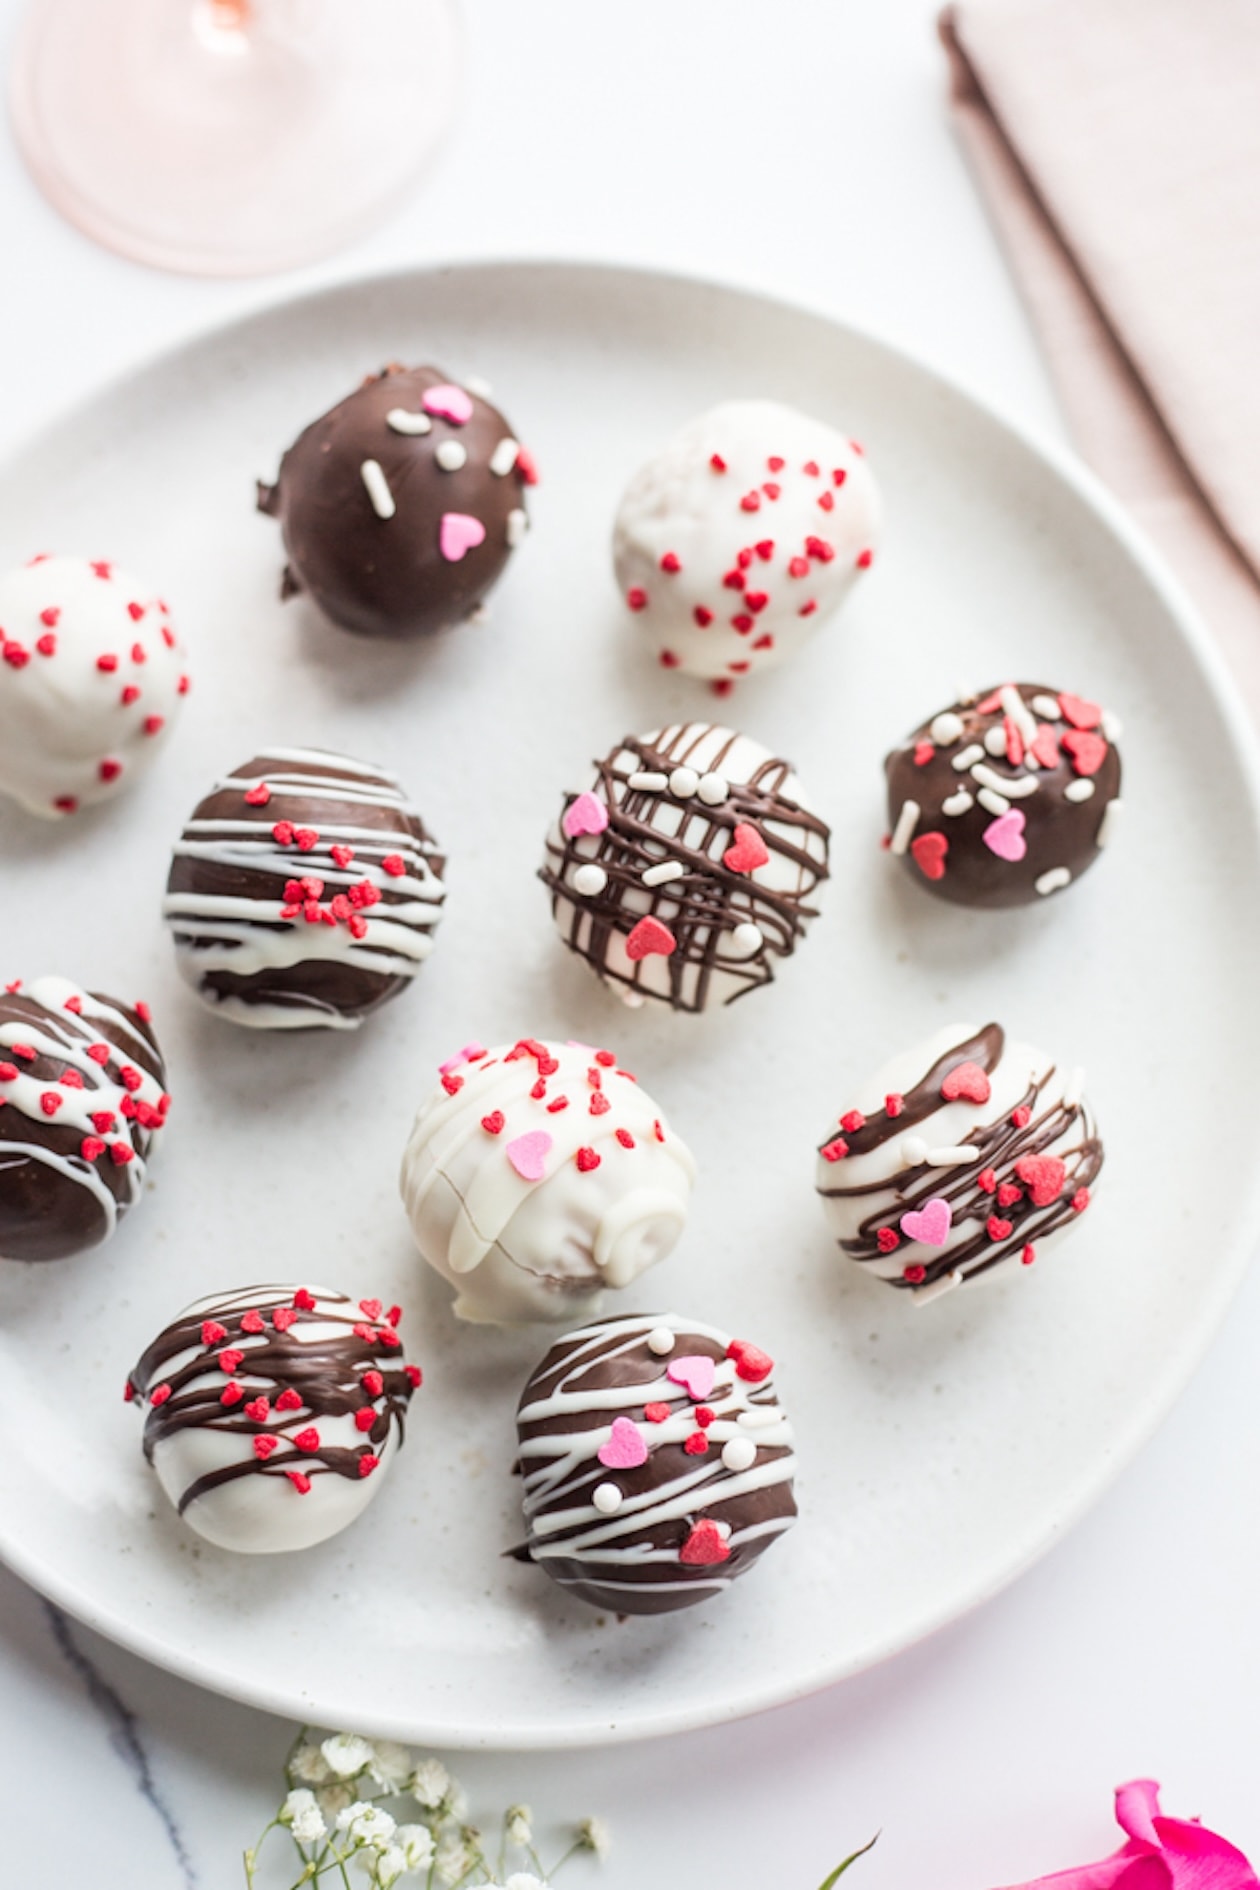 A plate of chocolate covered truffles covered with red and pink Valentine's Day sprinkles